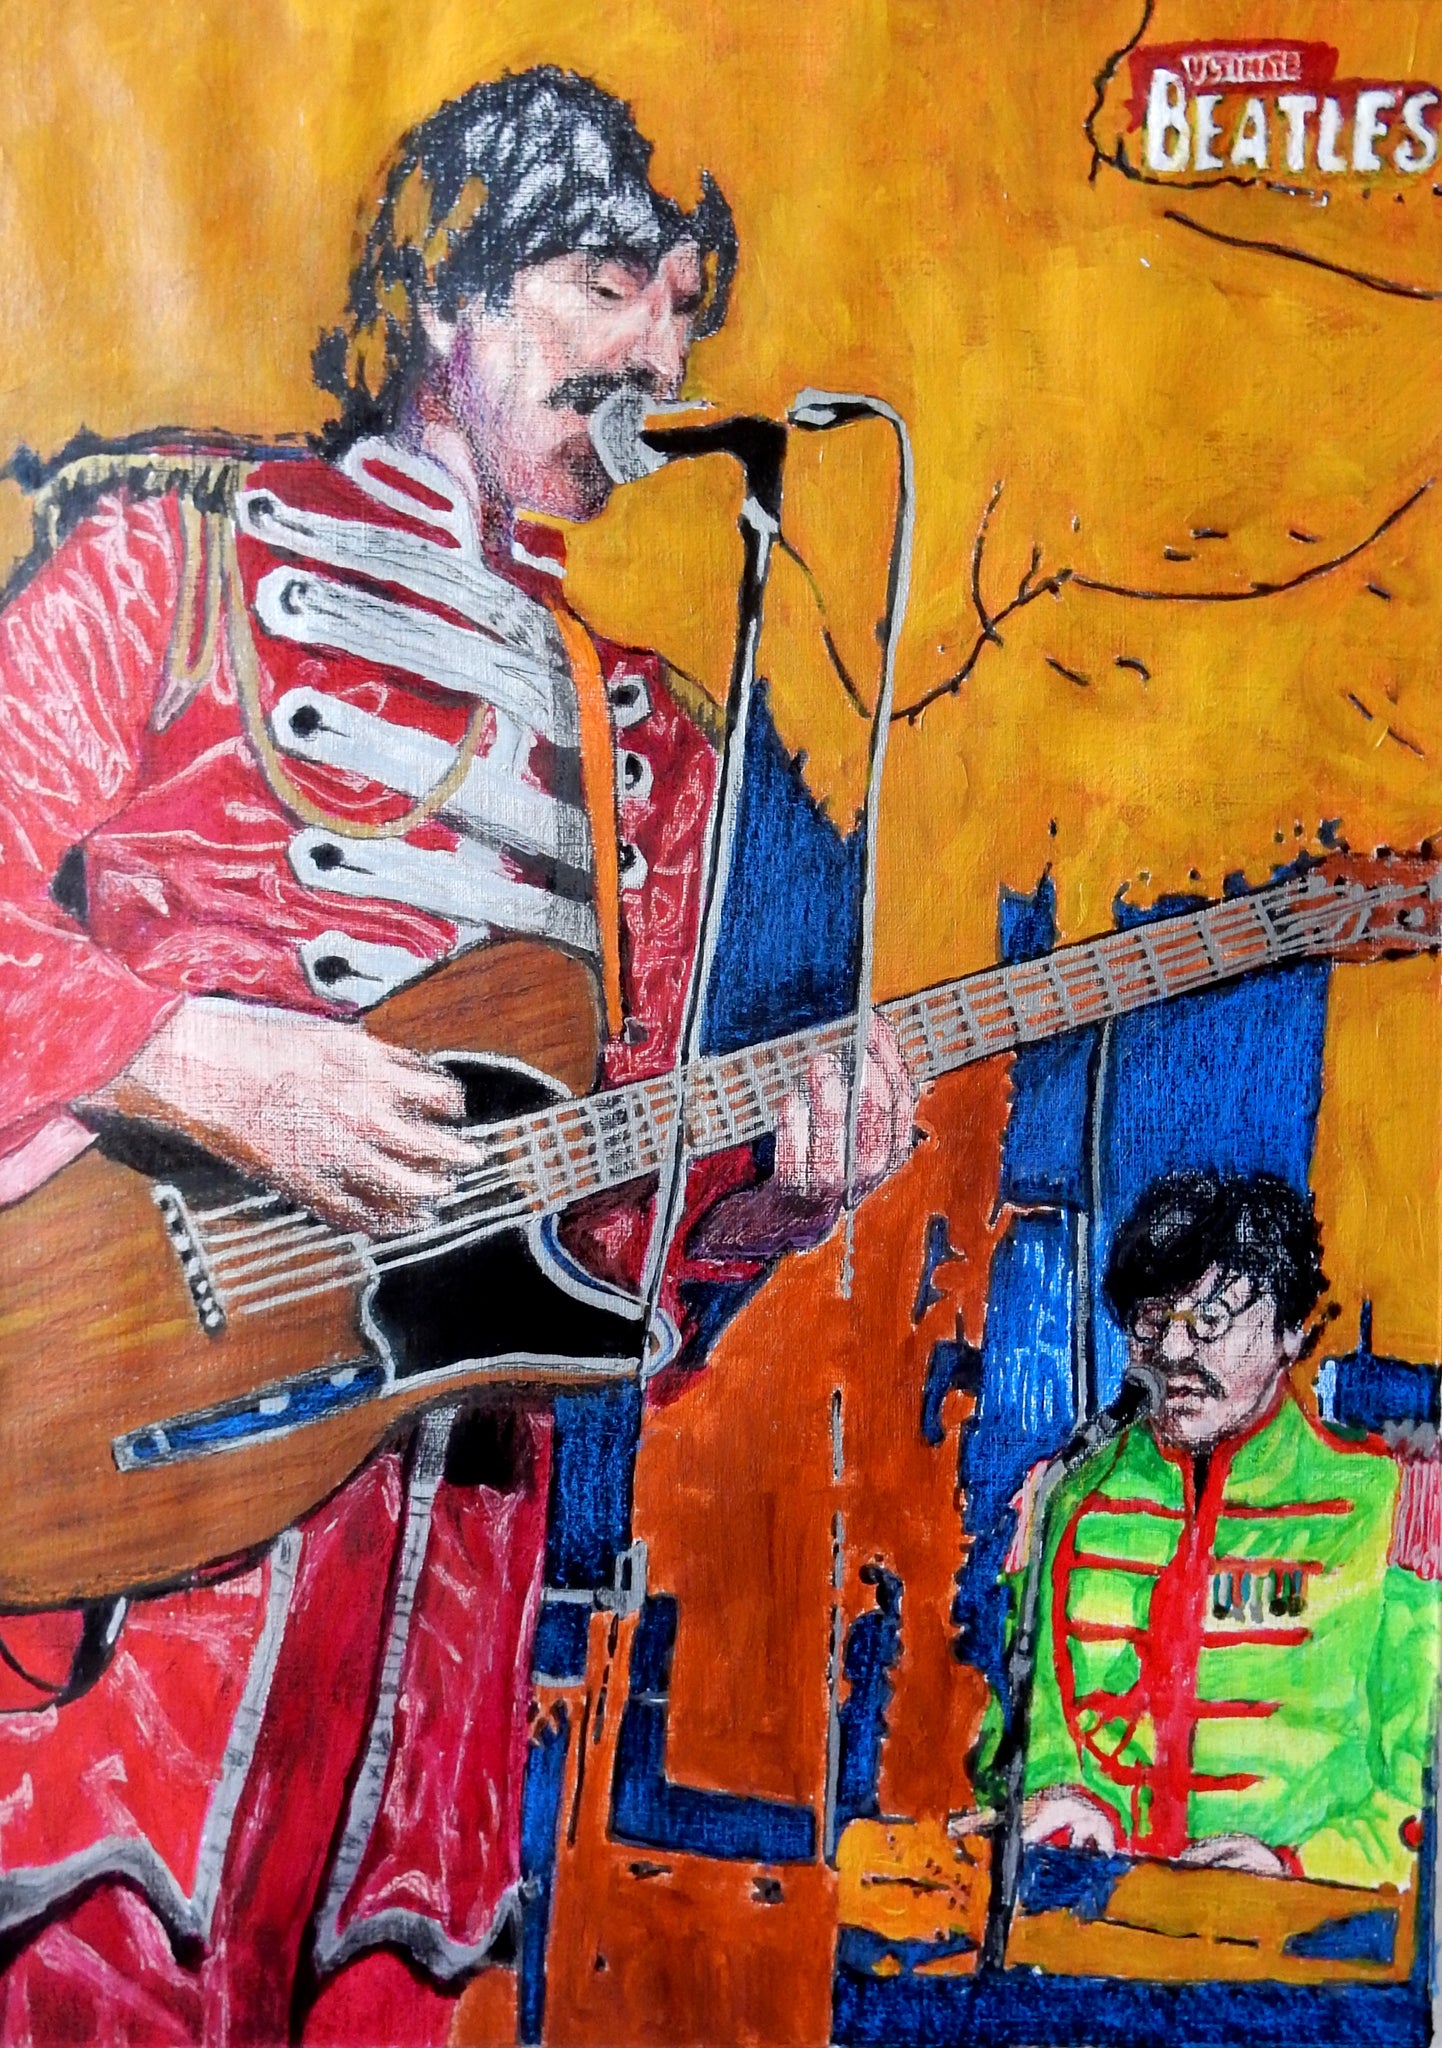 The Ultimate Beatles mixed media on paper by Stella Tooth artist